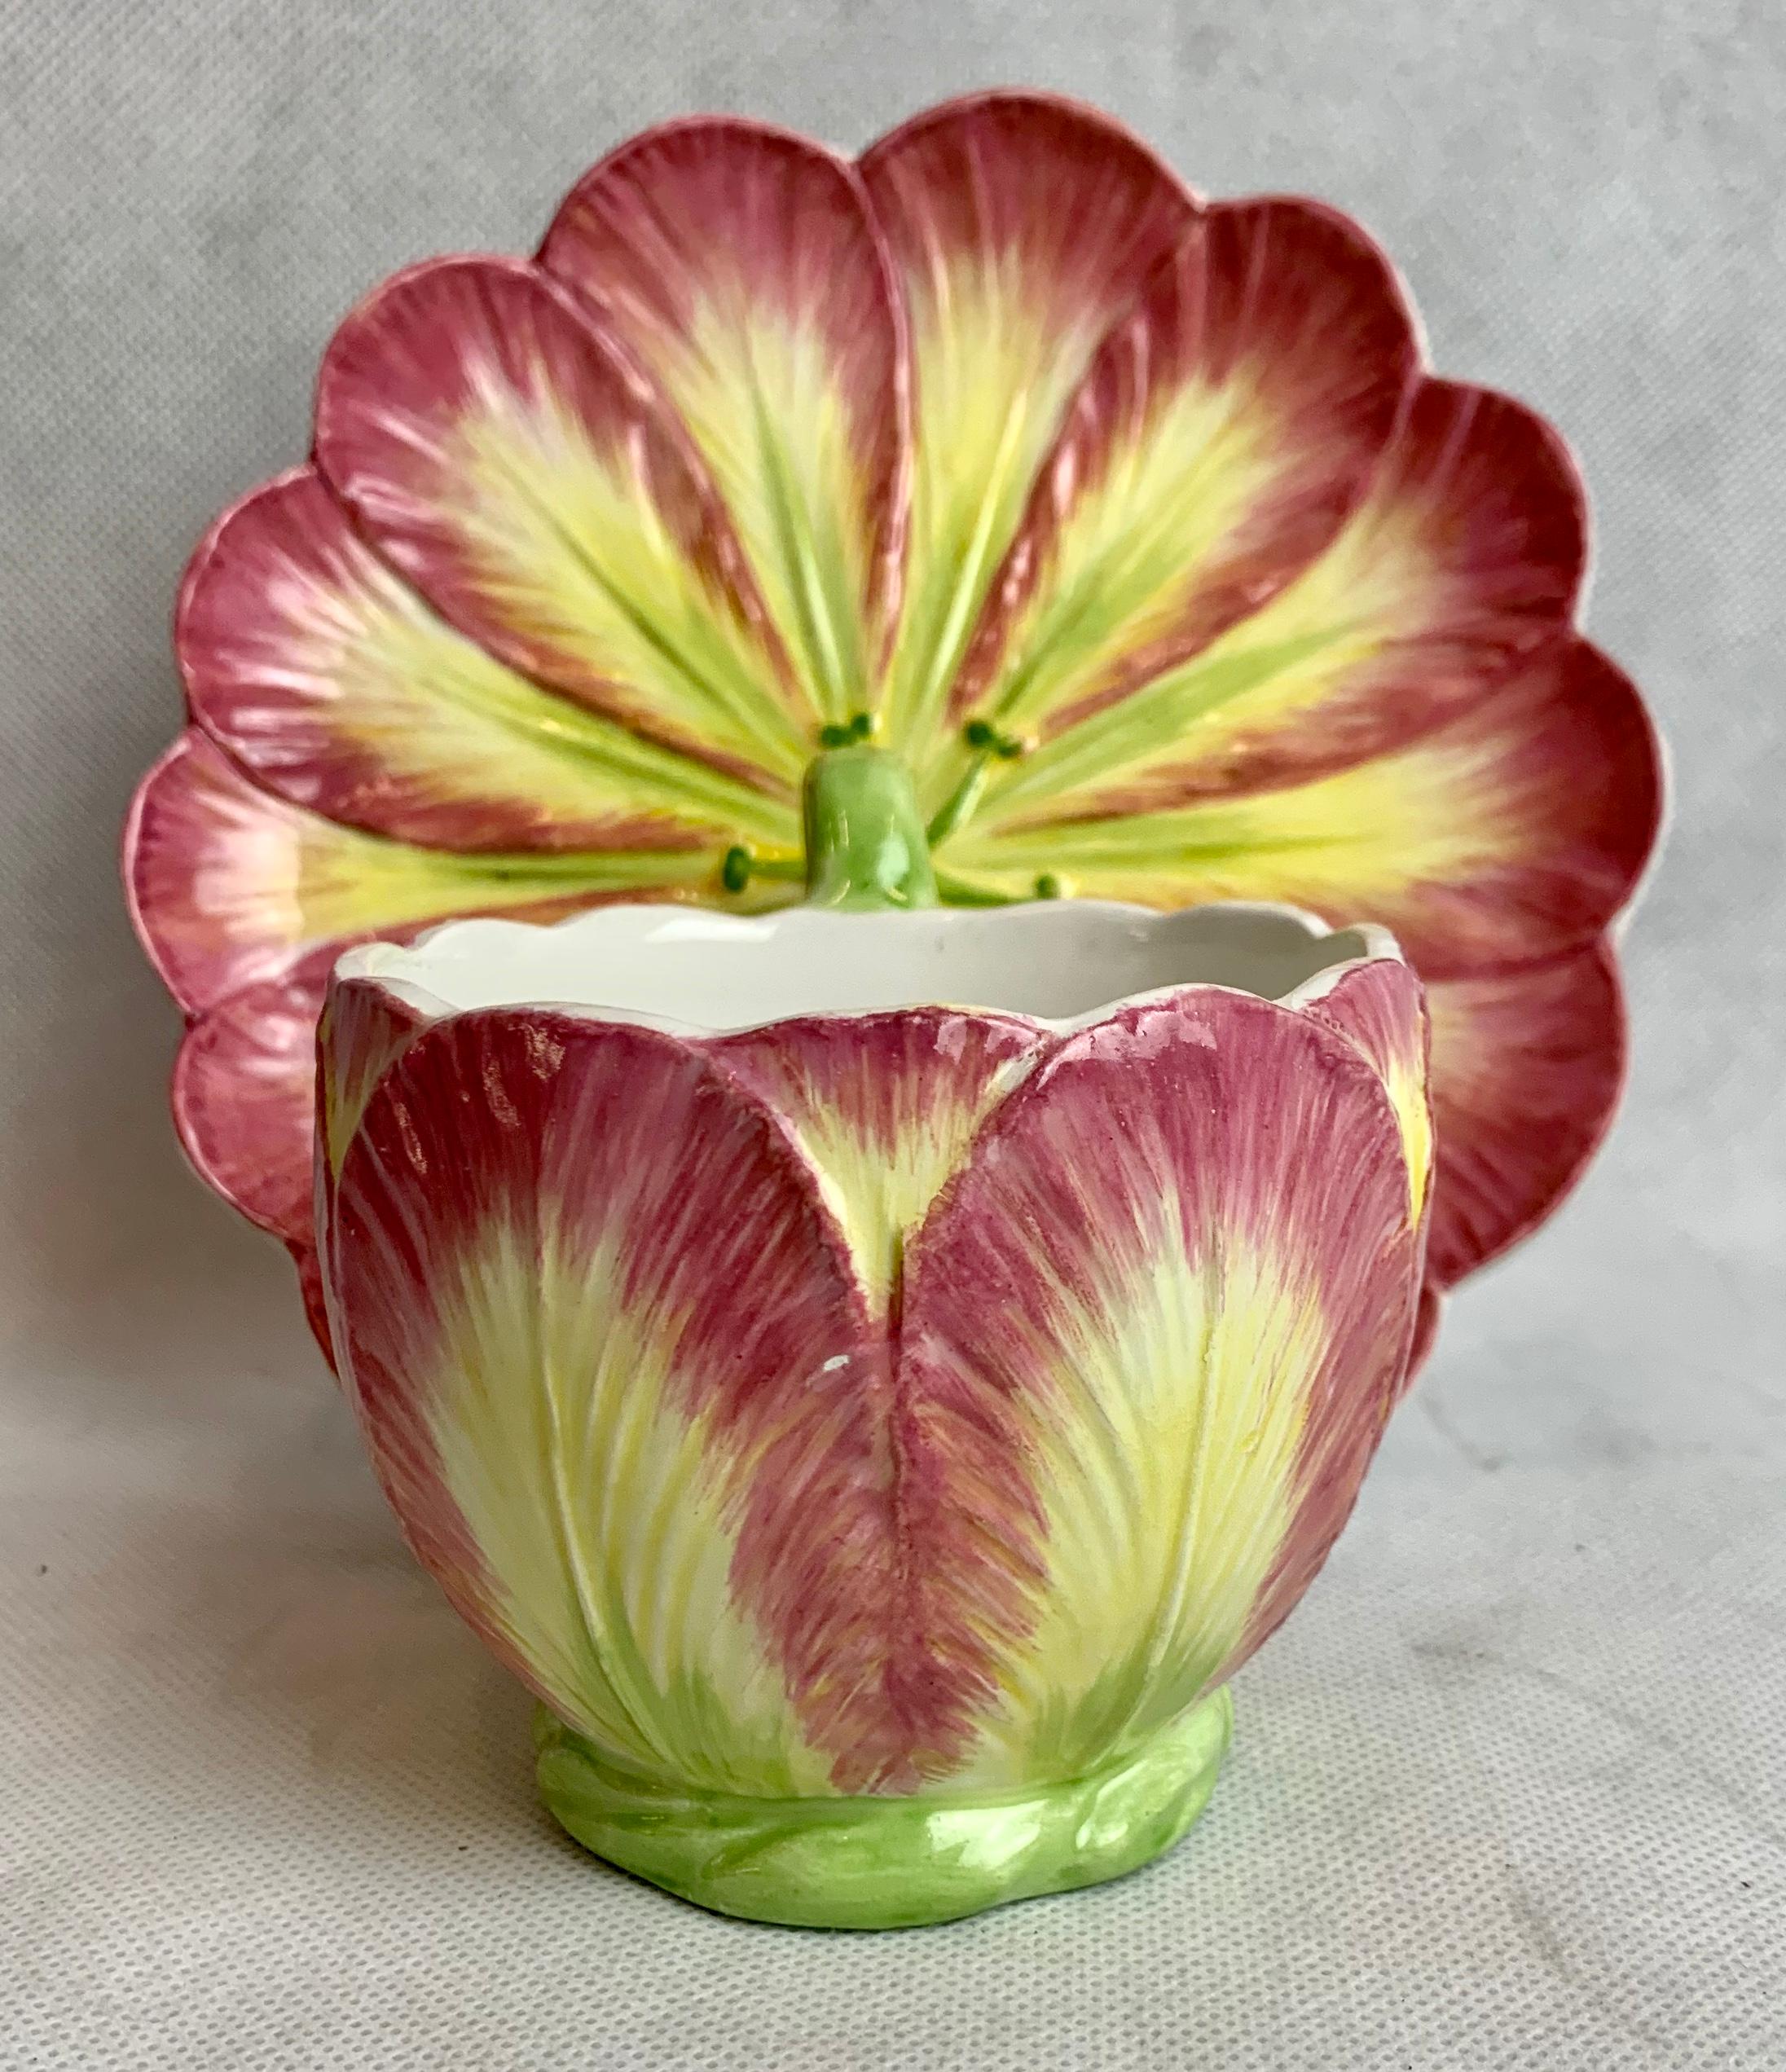 Italian  Majolica Cup and Saucer with Tulip Motif by Mottahedeh